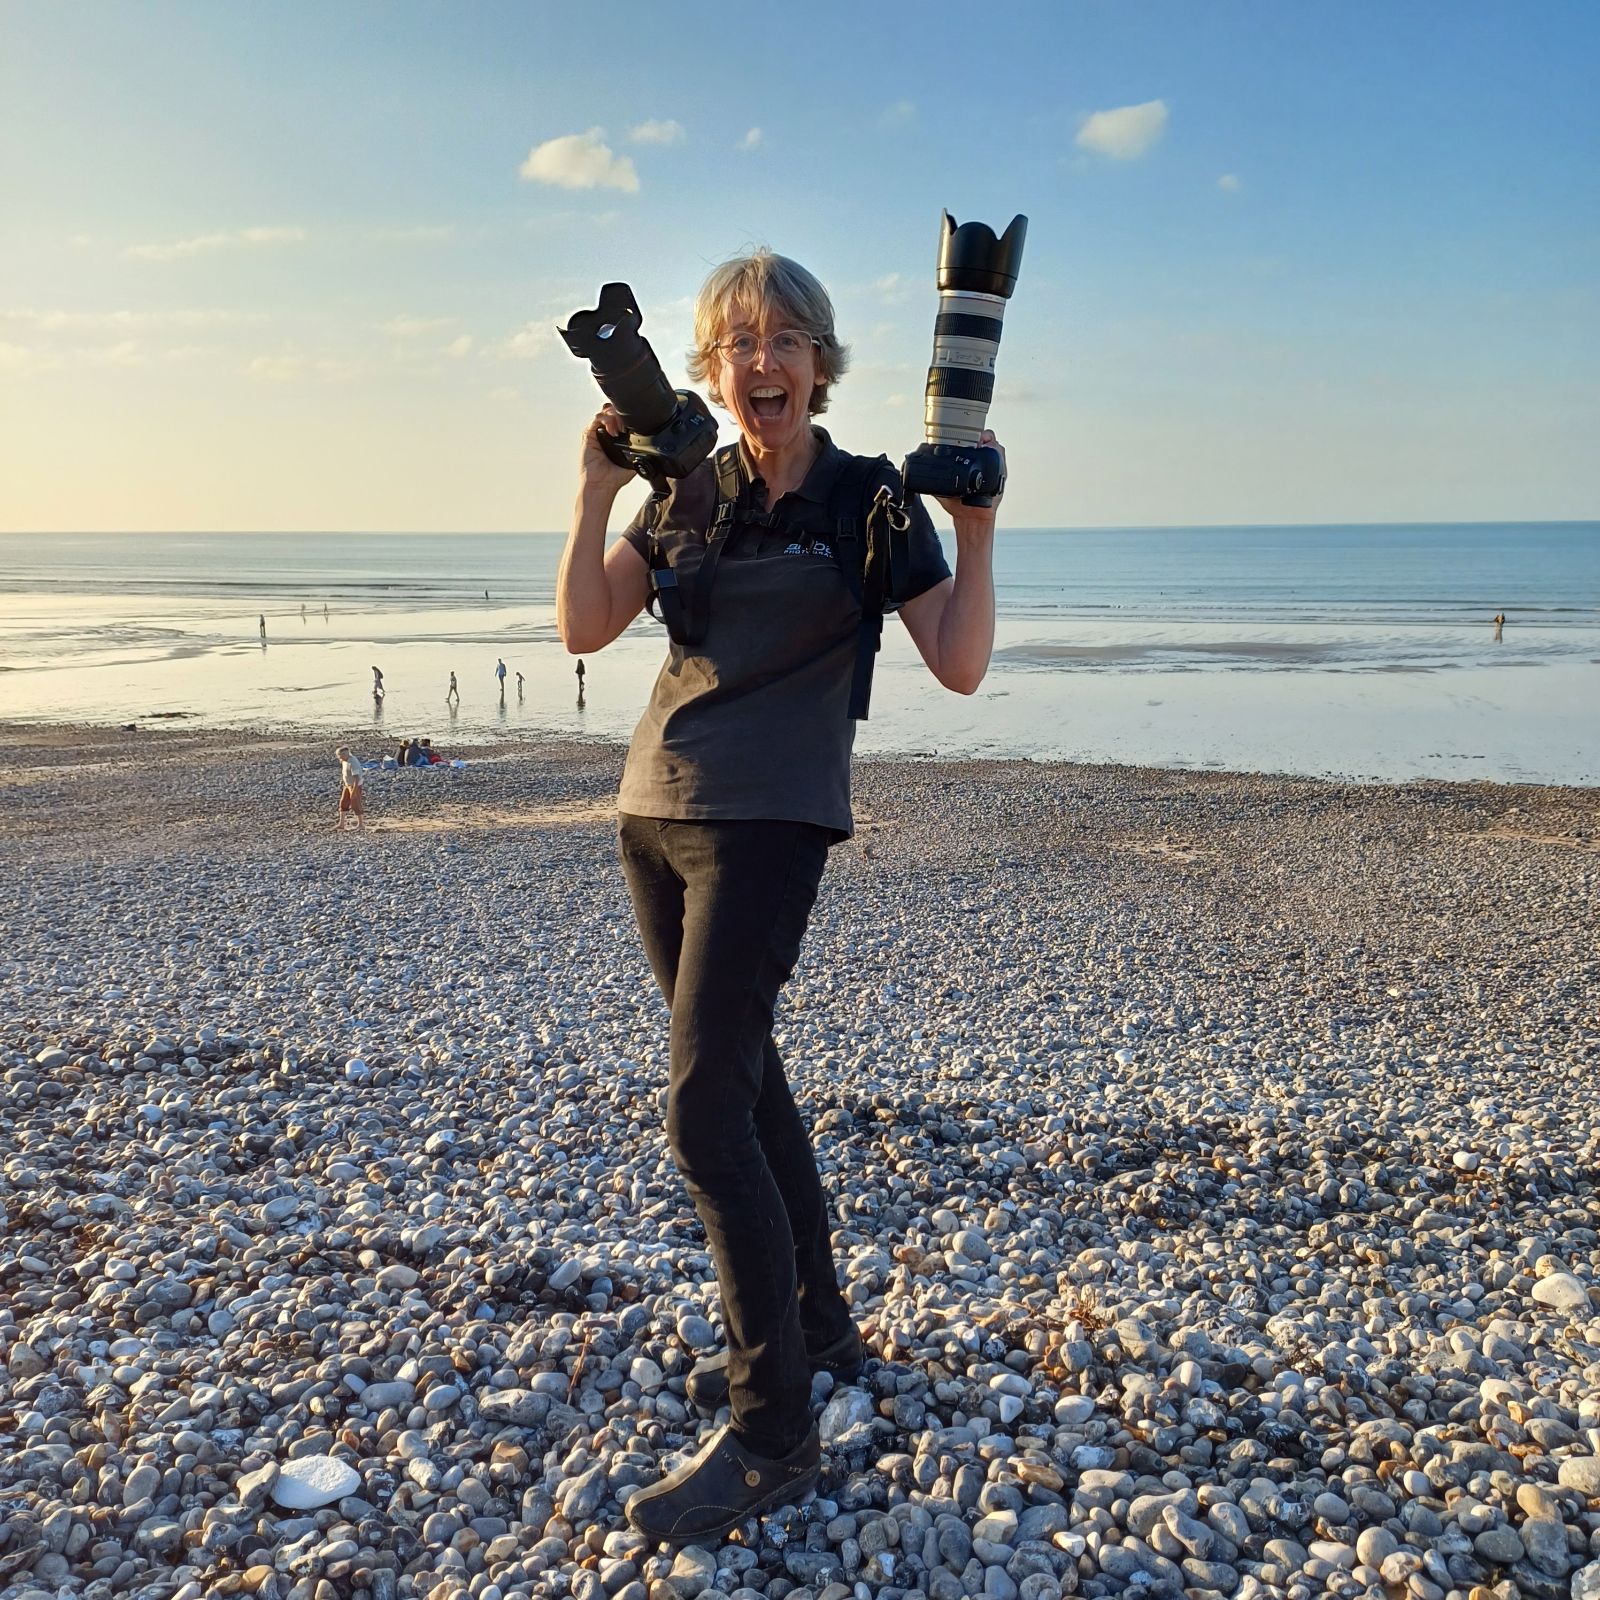 About Sabina, bilingual photographer - Normandy & France